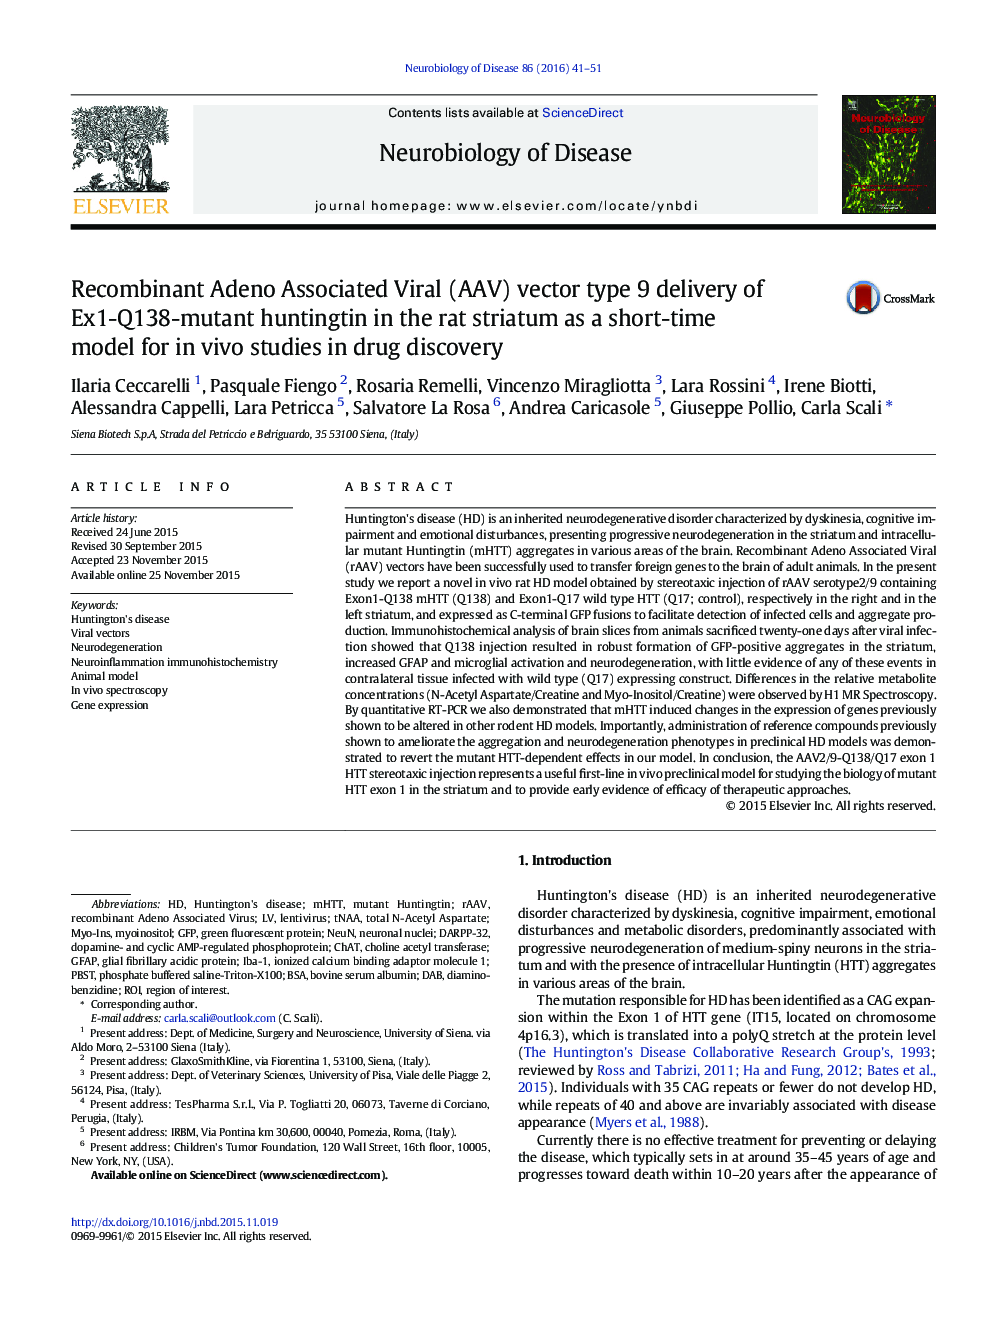 Recombinant Adeno Associated Viral (AAV) vector type 9 delivery of Ex1-Q138-mutant huntingtin in the rat striatum as a short-time model for in vivo studies in drug discovery